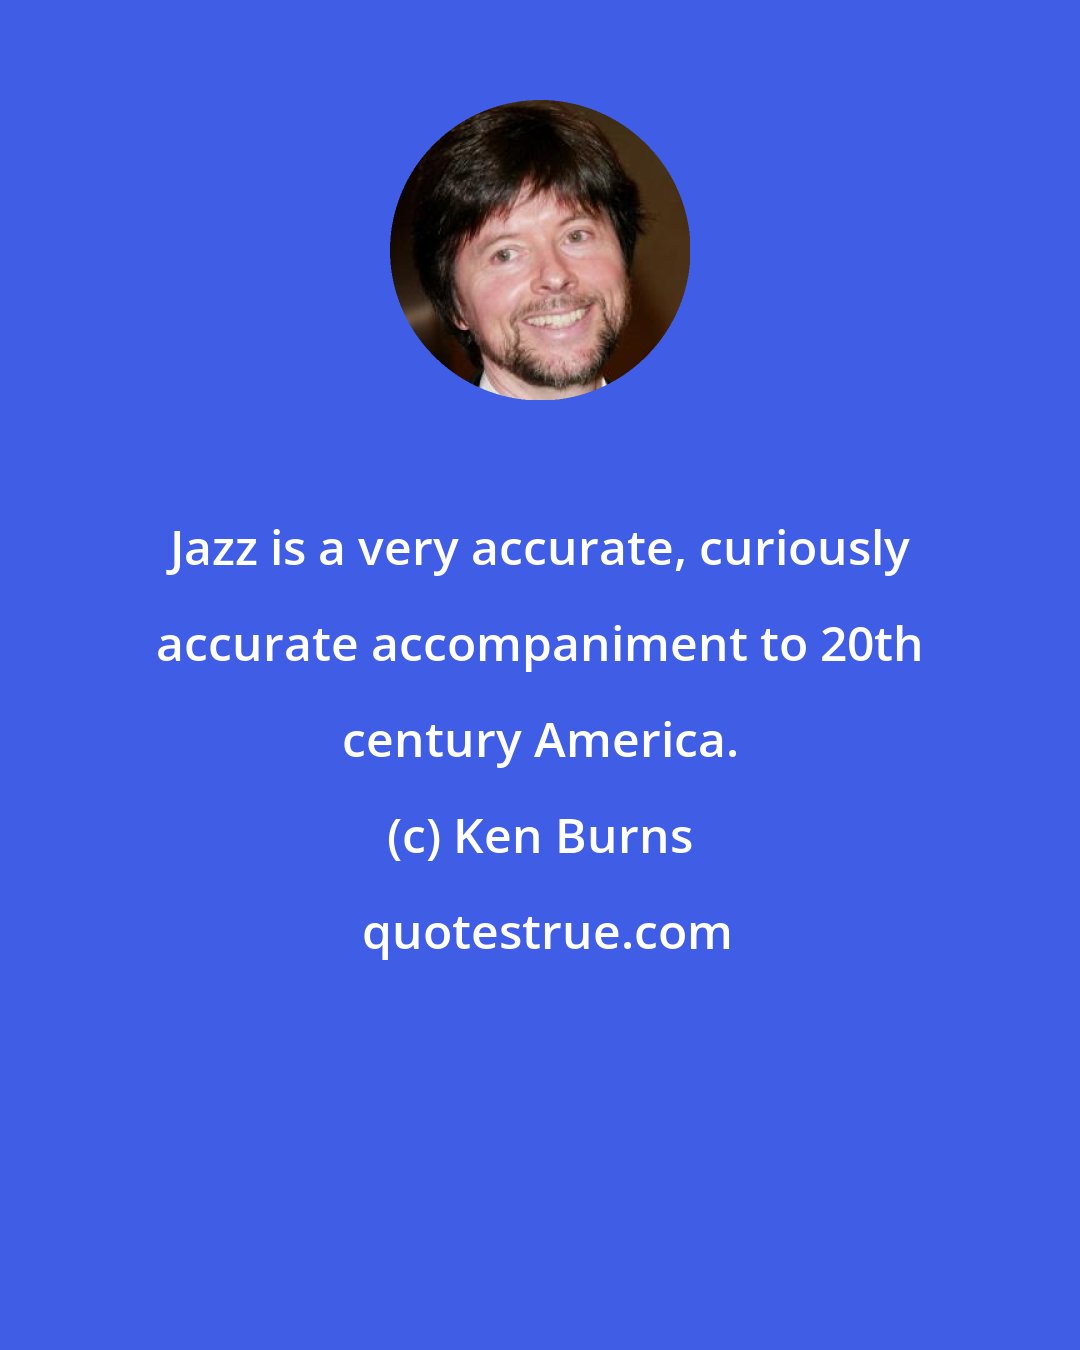 Ken Burns: Jazz is a very accurate, curiously accurate accompaniment to 20th century America.